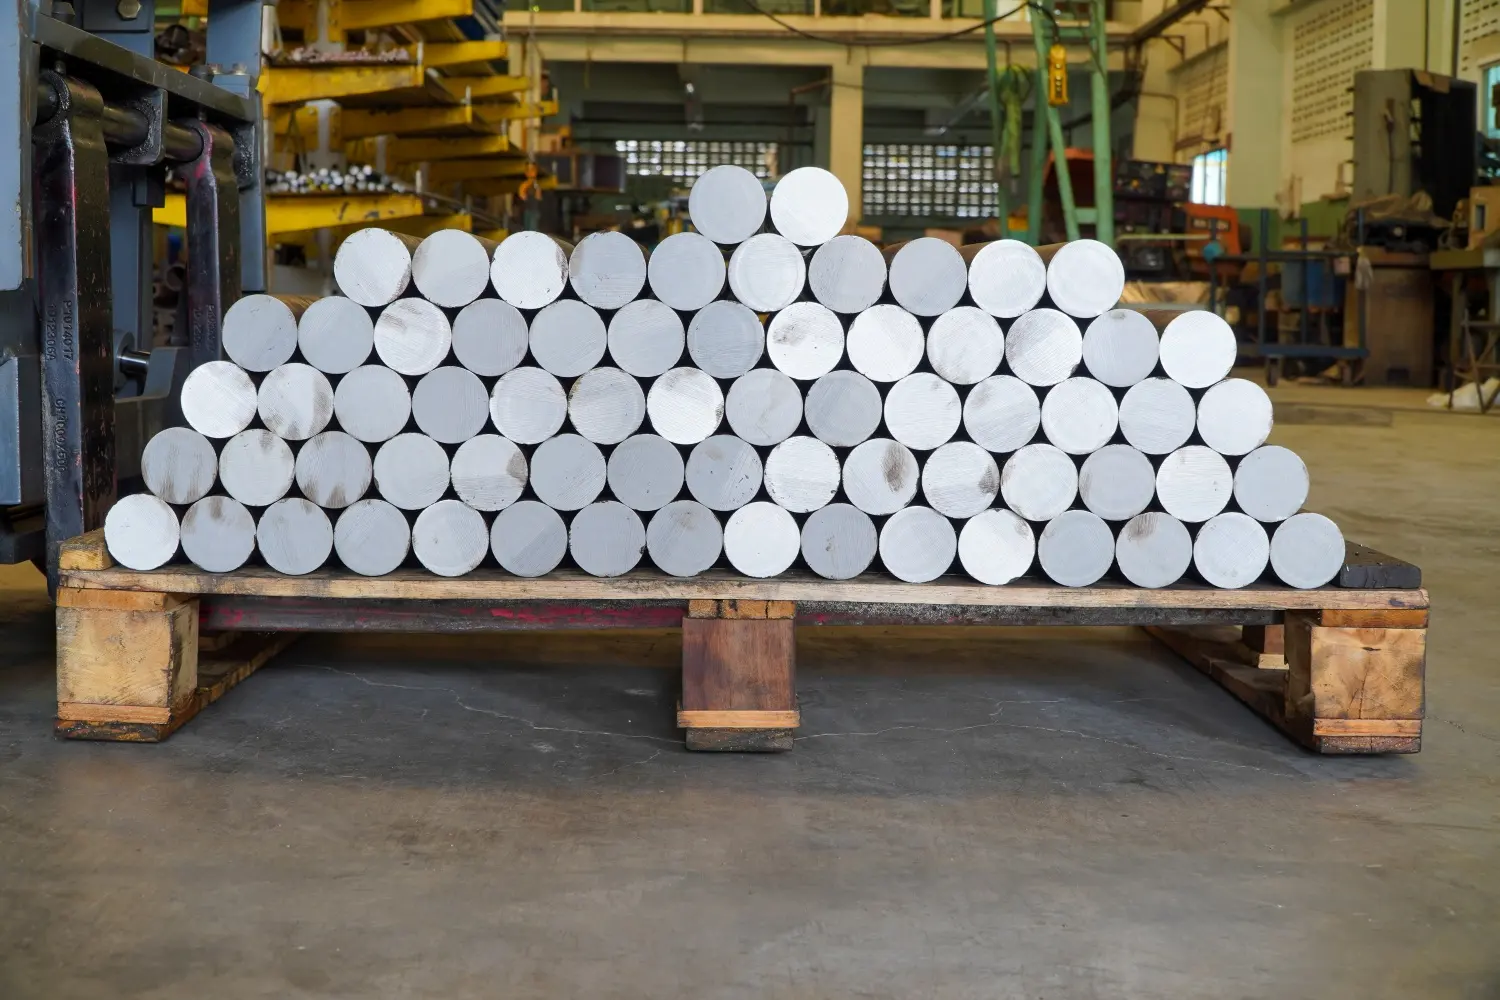 Punching Mold Steel Sheets Round Bar Fabricator Tubes 7531 Material Element Mo V Plate Fabrication Knives